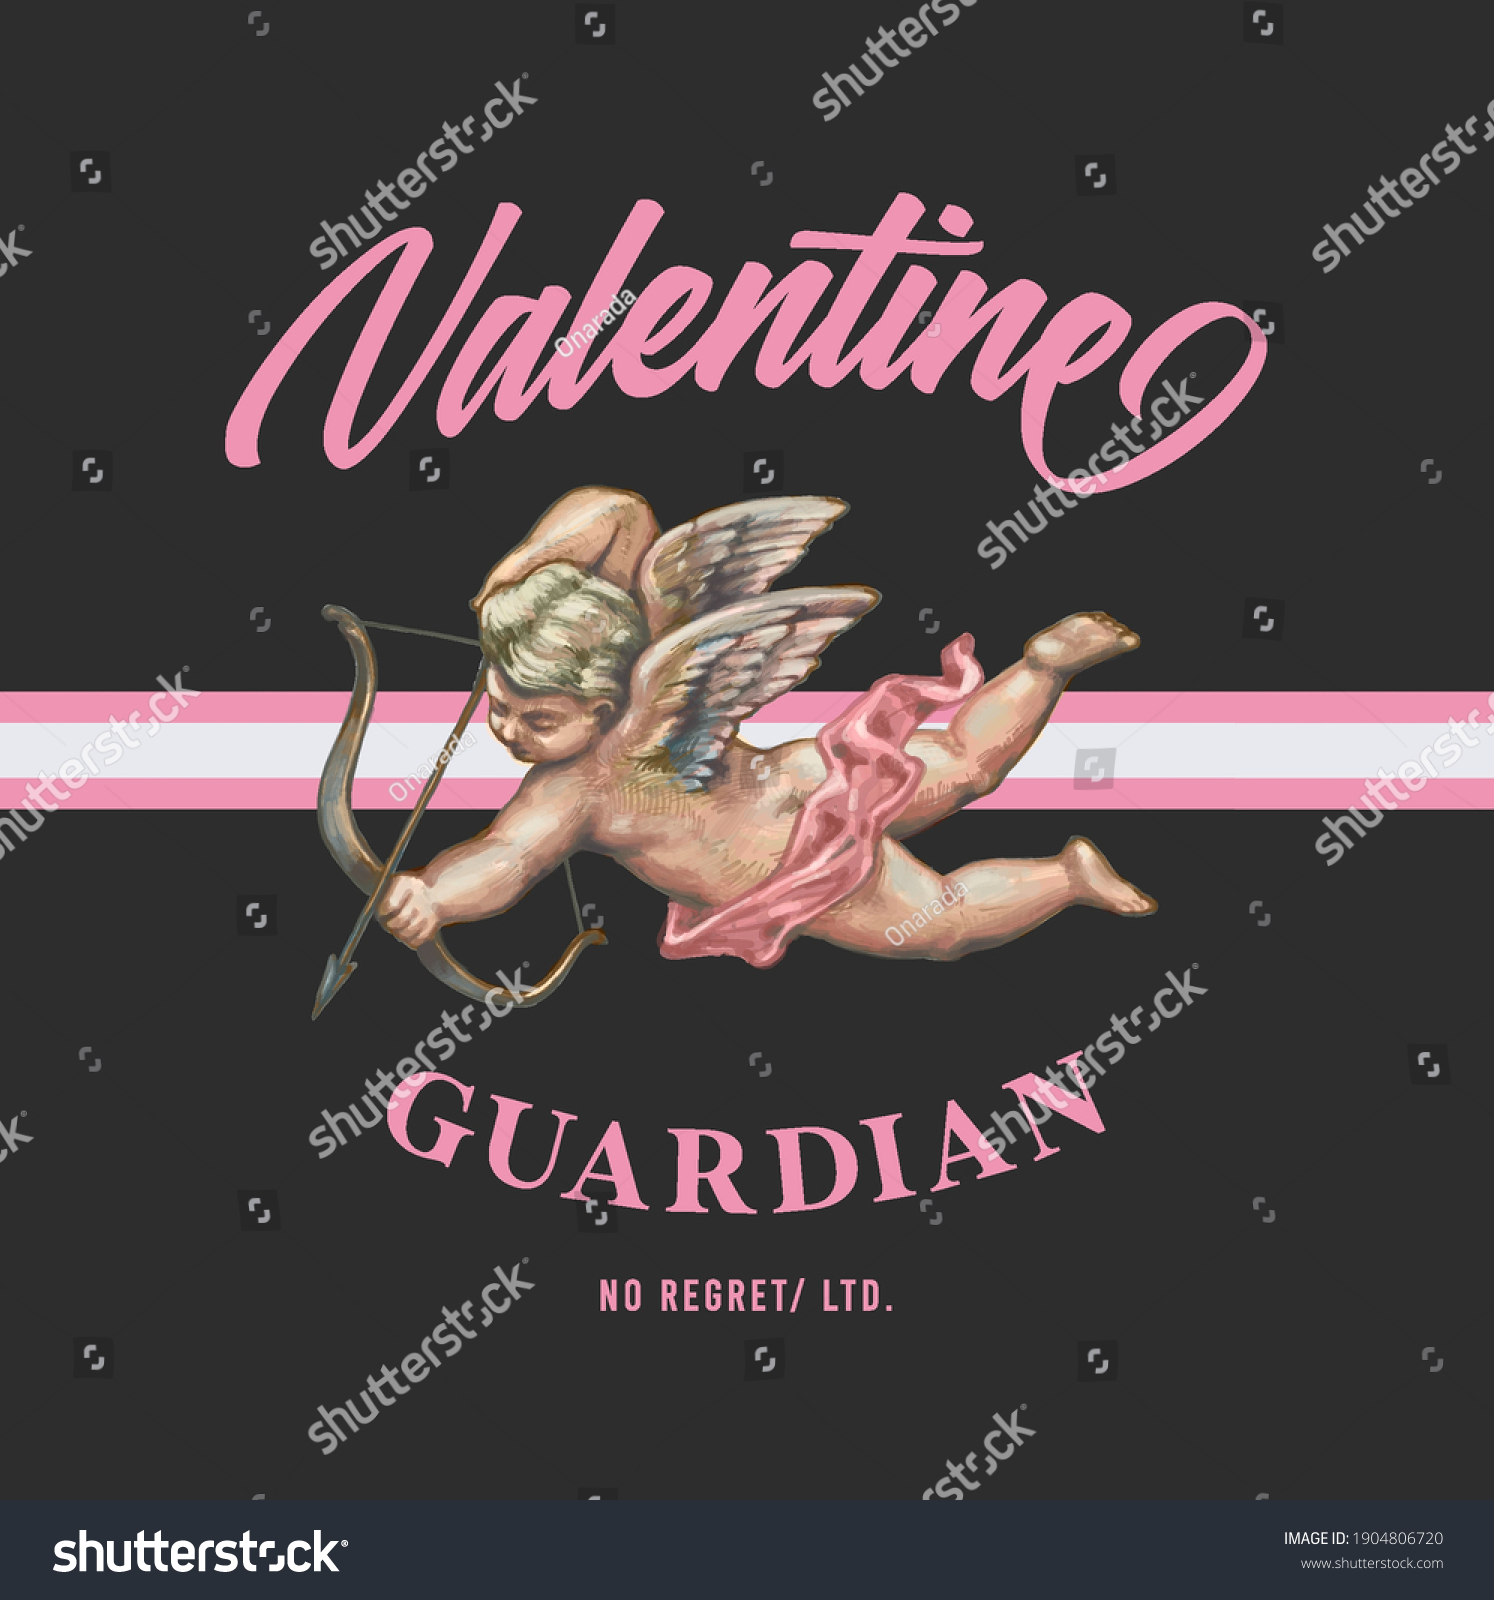 SVG of Graphic t-shirt design, valentine guardian slogan with Flying Cupid holding bow and aiming or shooting arrow ,vector illustration for t-shirt. svg